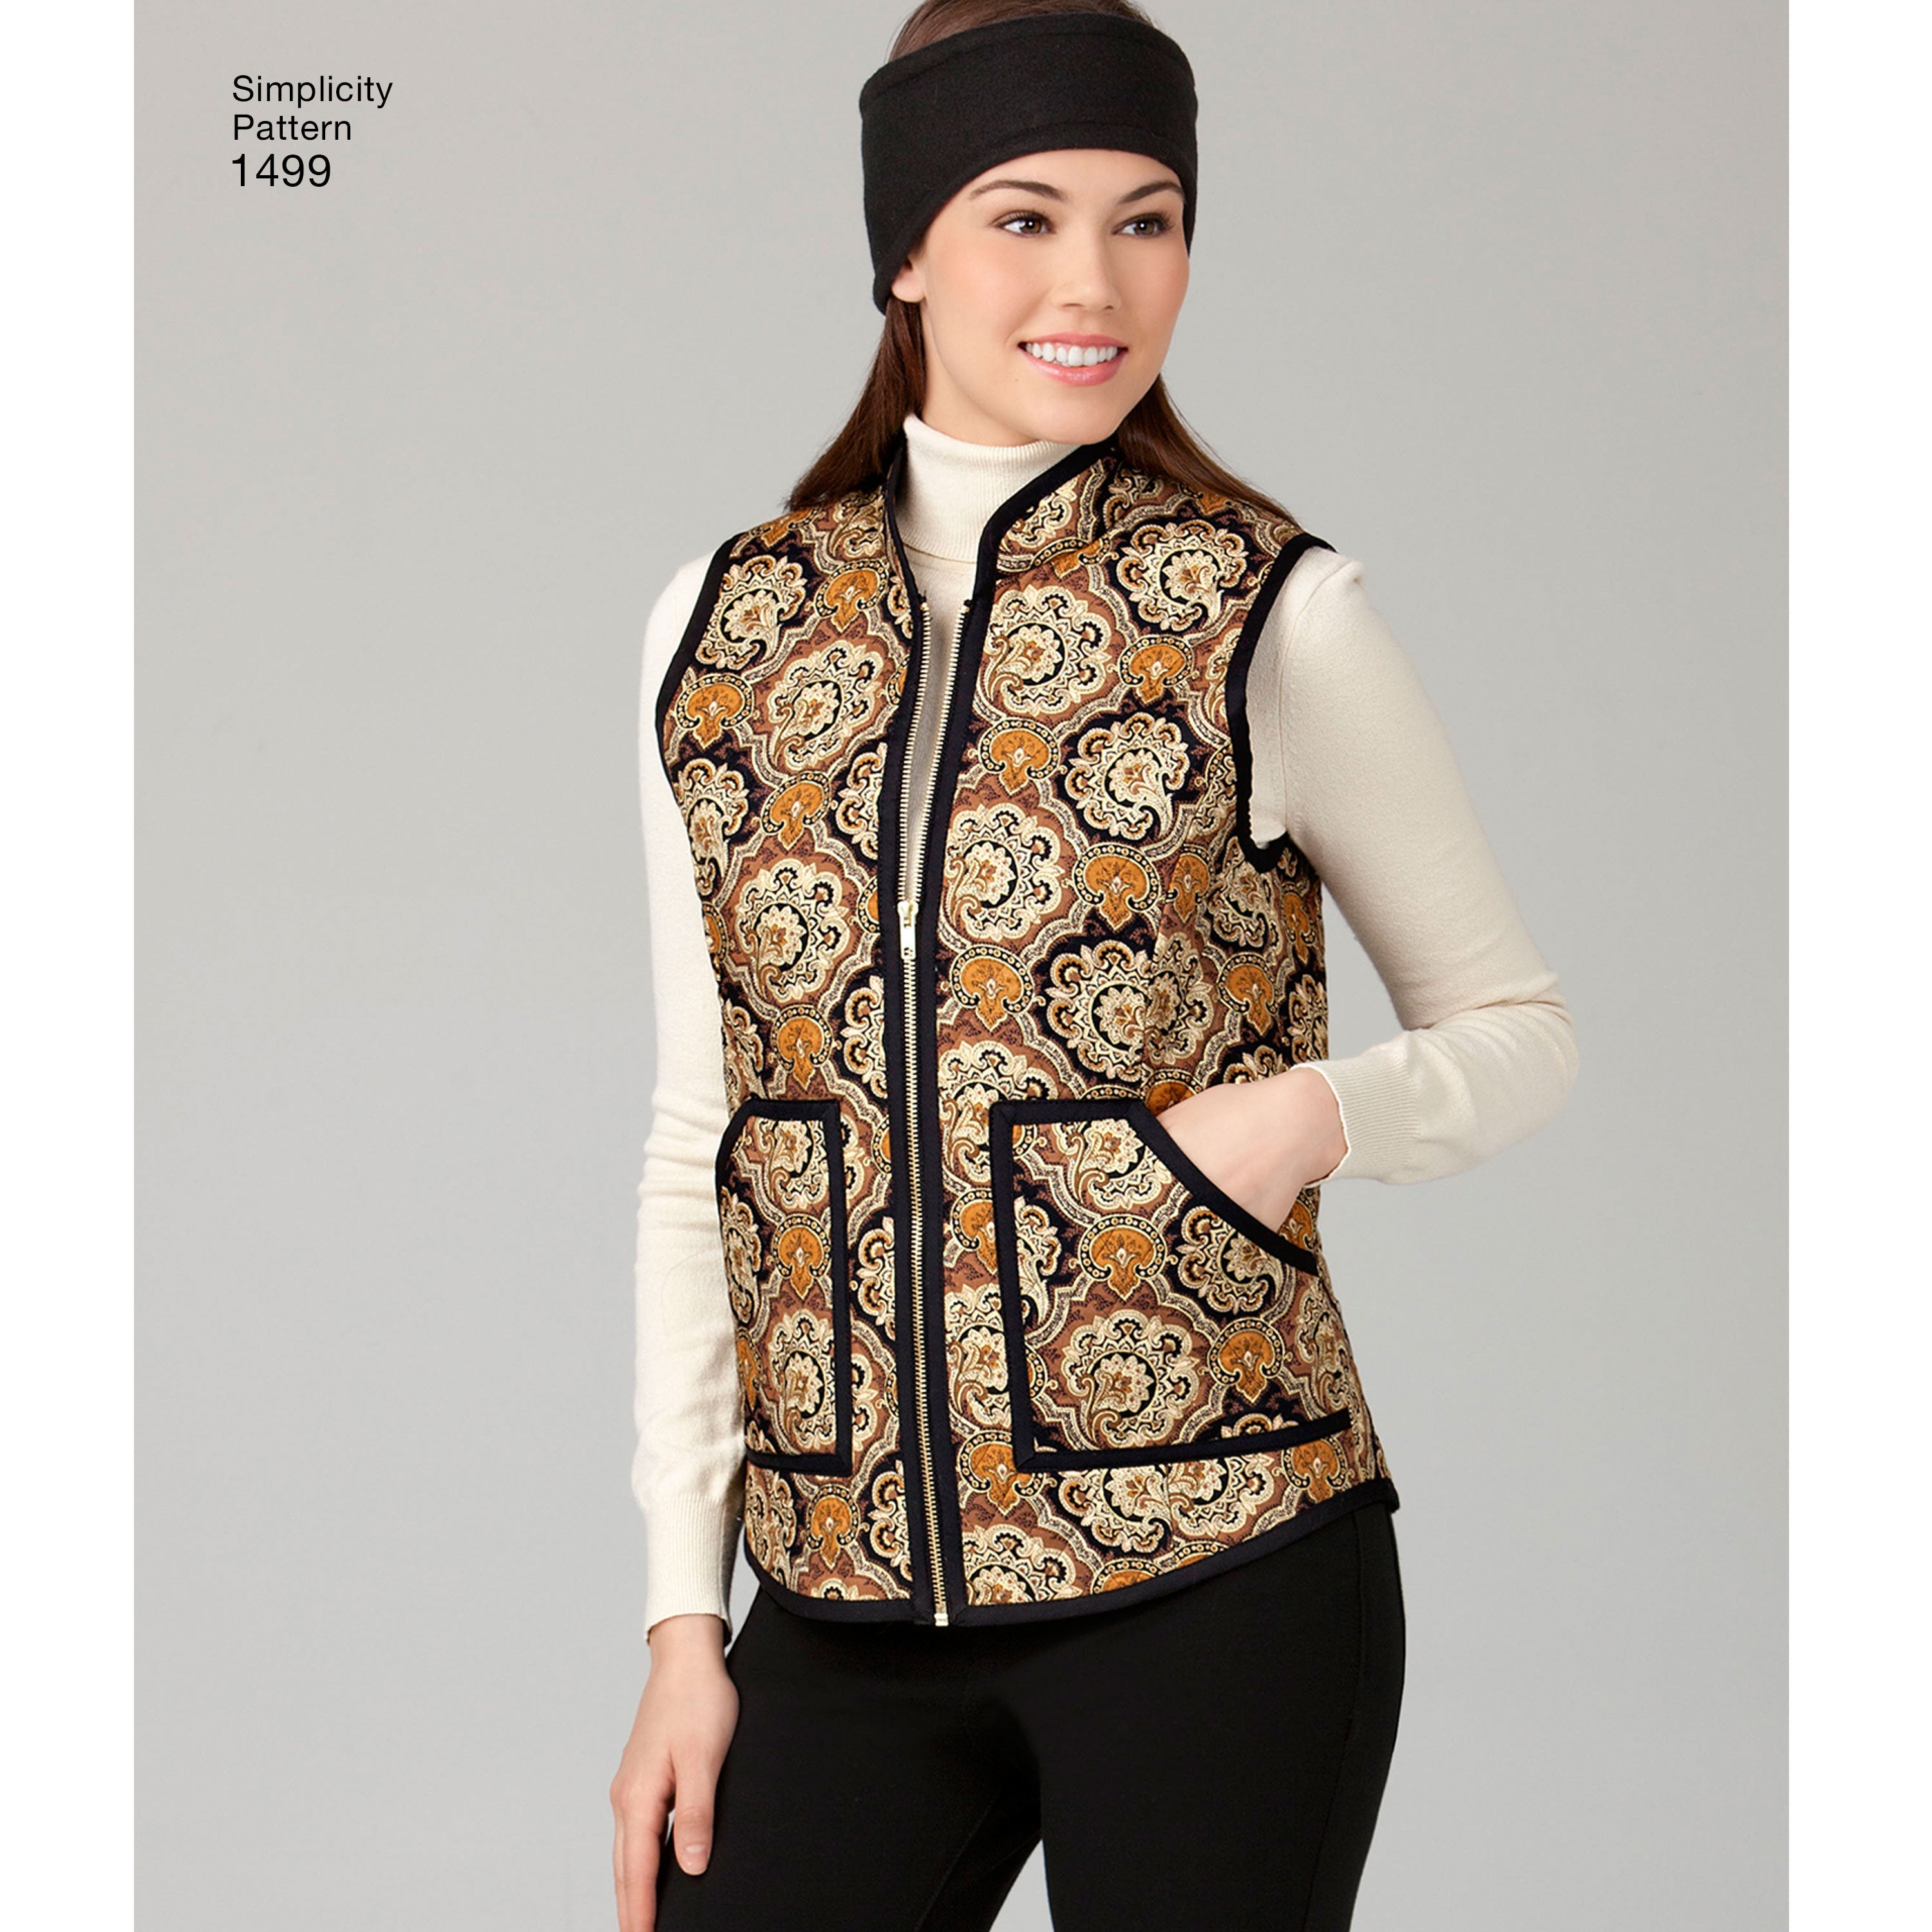 Simplicity Pattern 1499 Misses' Vest and Headband | American Sewing Guild from Jaycotts Sewing Supplies